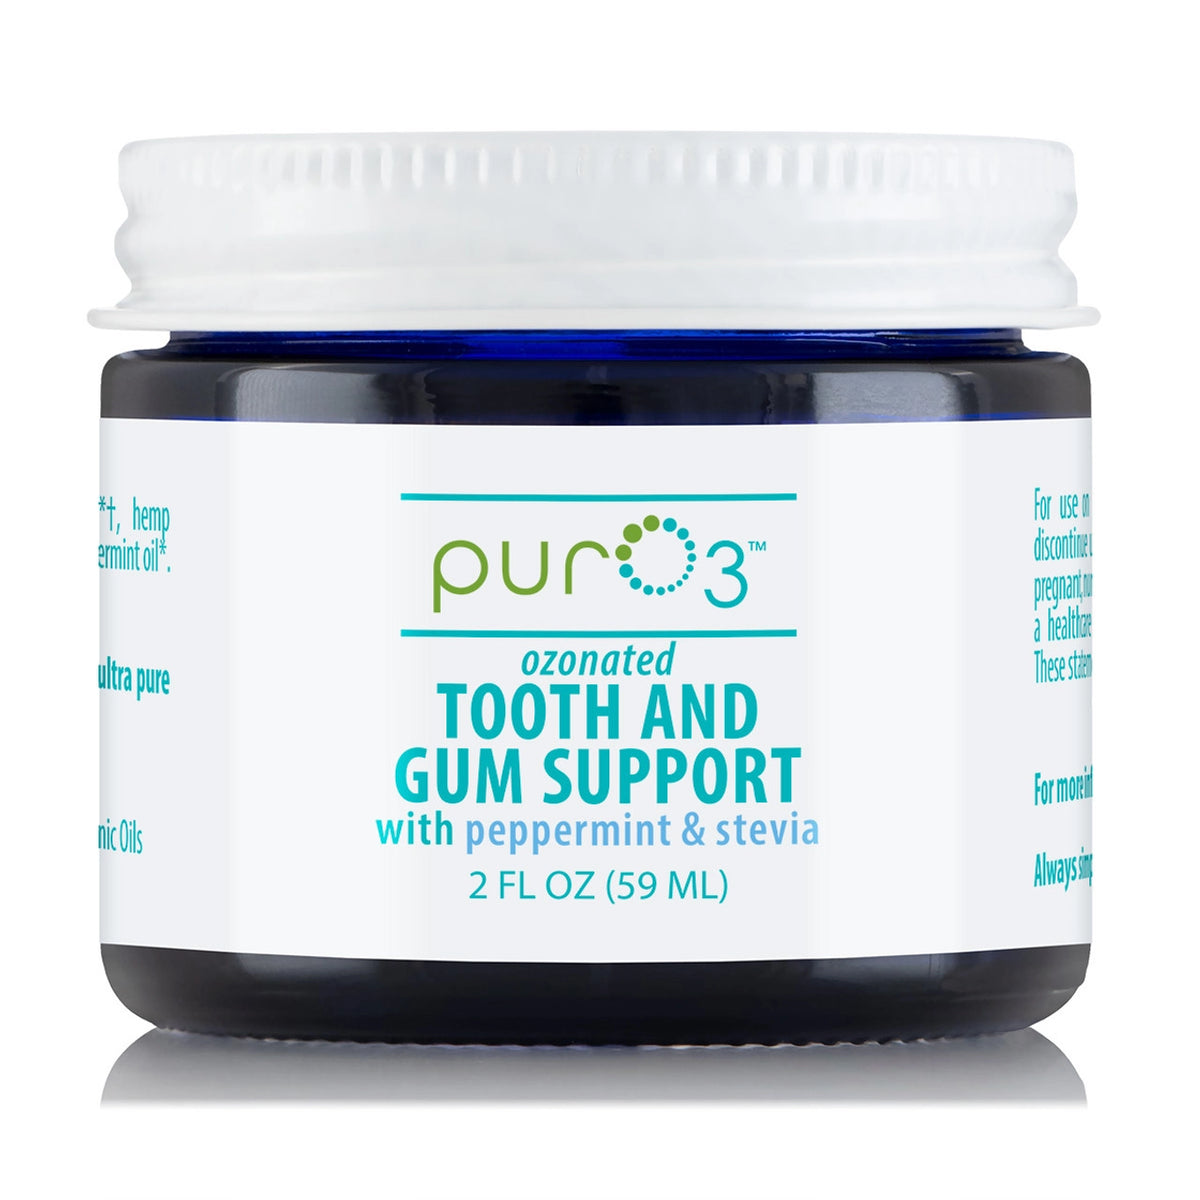 PurO3 Ozonated Tooth and Gum Support - Peppermint Stevia (2fl. oz)